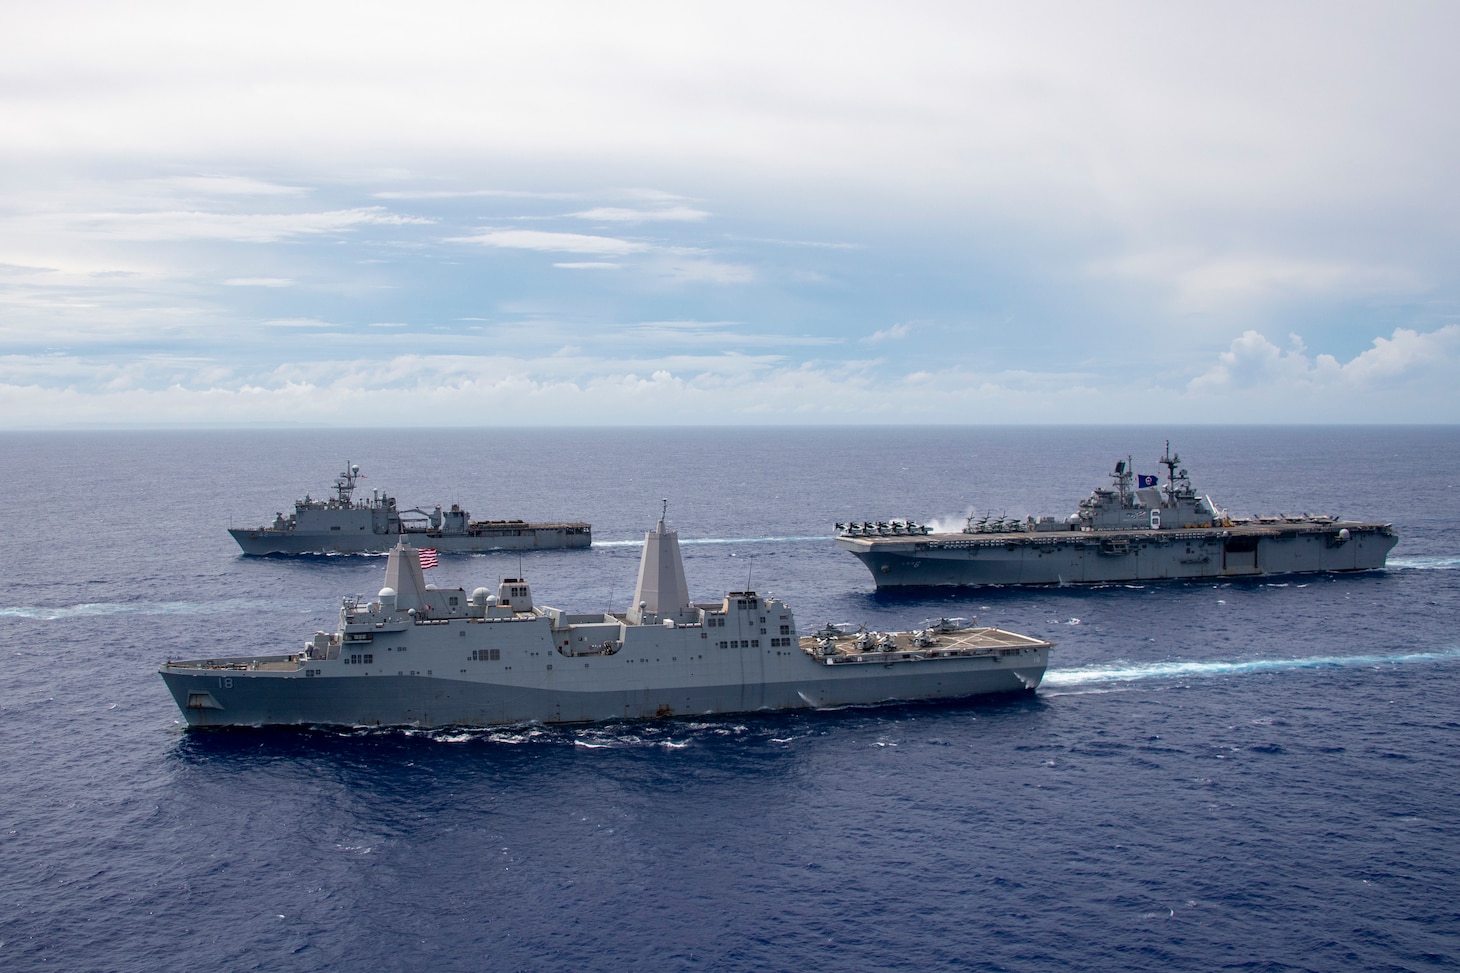 PHILIPPINE SEA (June 13, 2021) The America Amphibious Ready Group (ARG) sail in formation. Clockwise from right: USS America (LHA 6), USS New Orleans (LPD 18), USS Germantown (LSD 42). The America ARG, along with the 31st Marine Expeditionary Unit, is operating in the U.S. 7th Fleet area of operations to enhance interoperability with allies and partners and serve as a ready response force to defend peace and stability in the Indo-Pacific region.